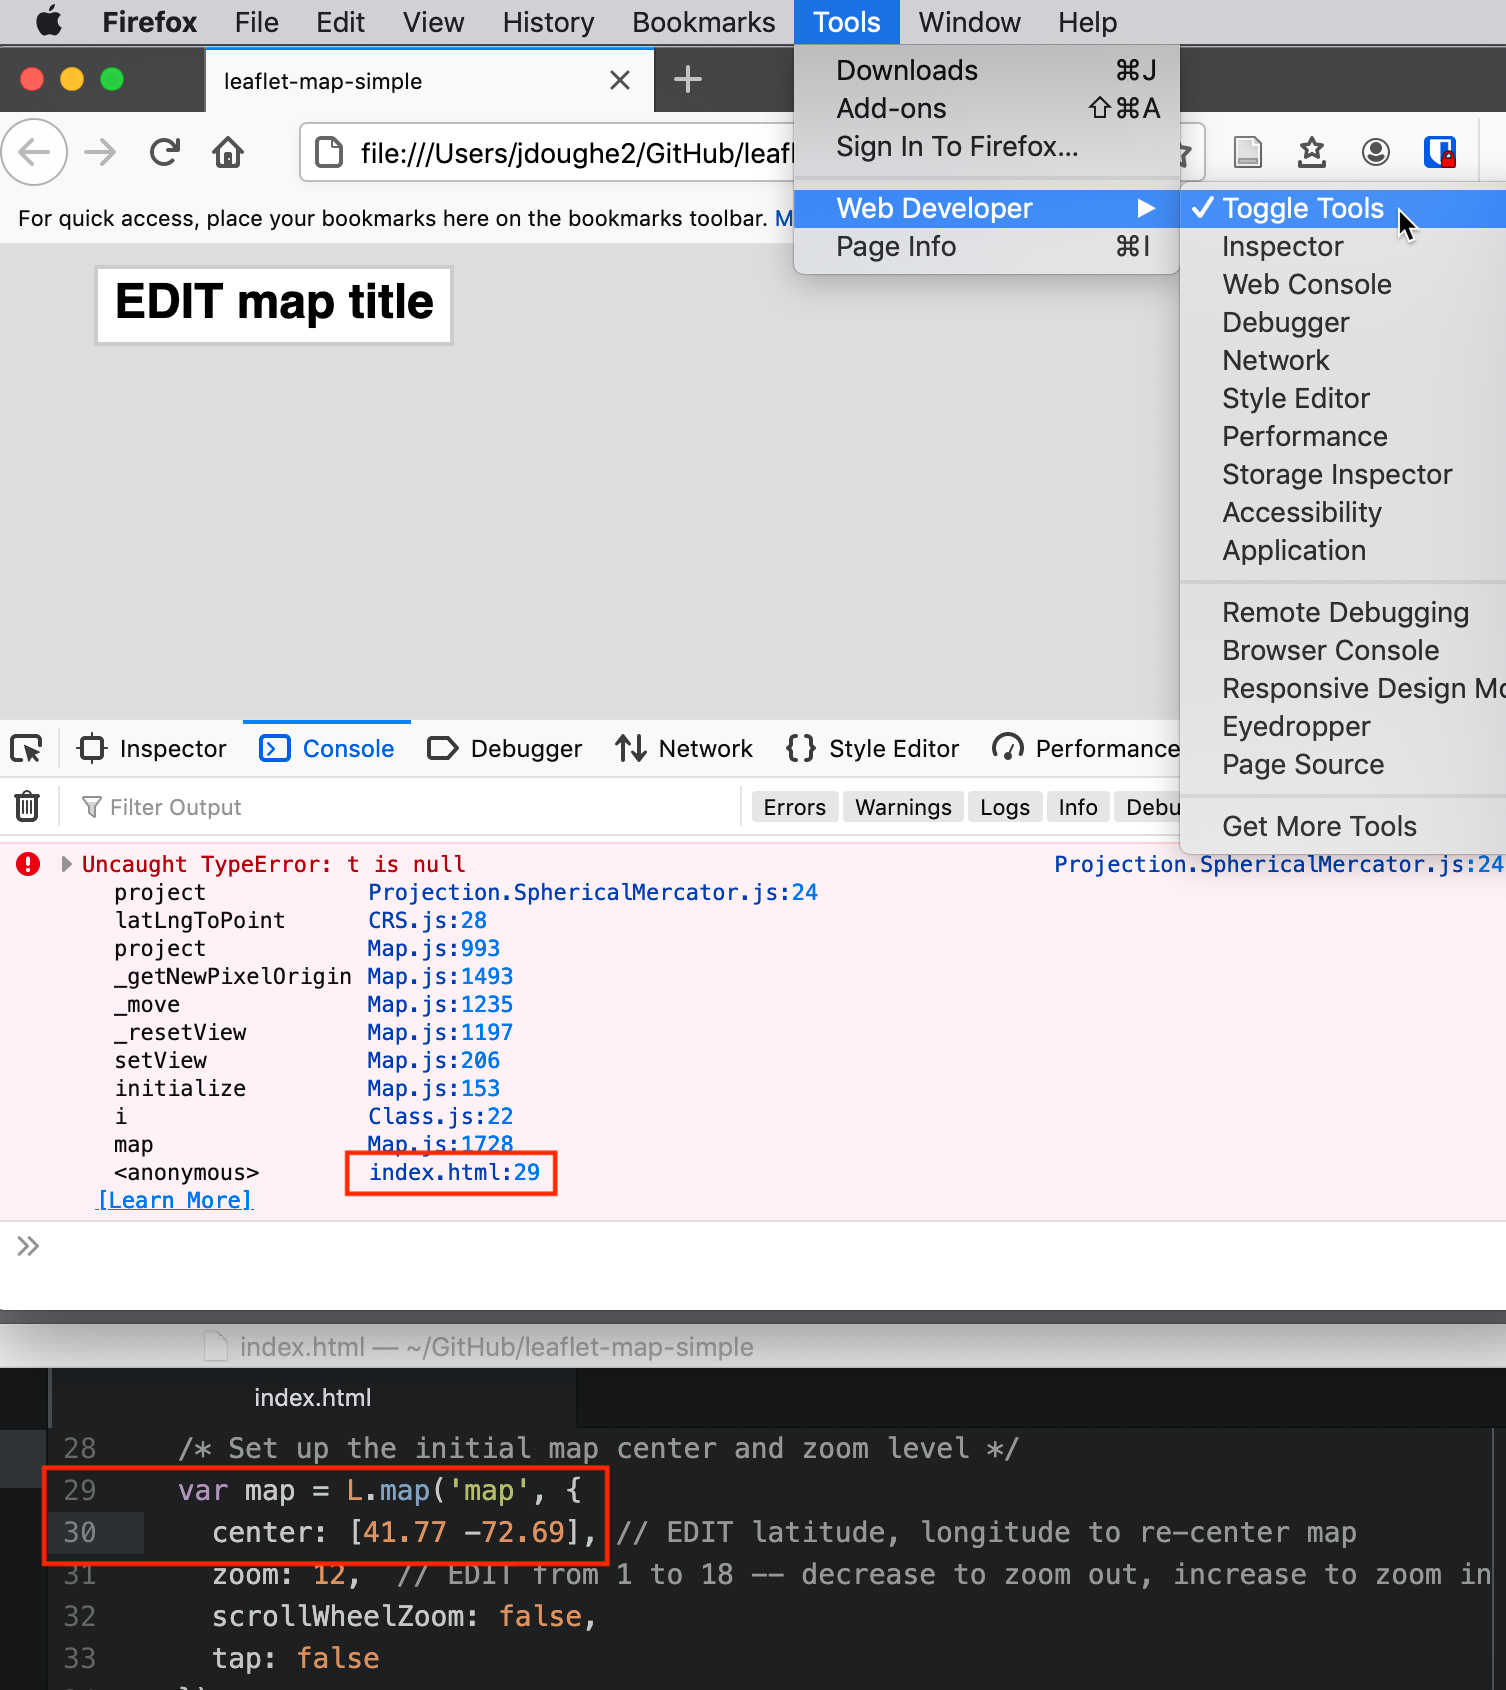 When you open a browser’s developer tools, the console window will display any errors it flags in the code for that web page. In this example, a “broken” map appears as a gray box (top), and the console shows an error in line 29 of the index.html file (middle), which offers a clue about a missing comma between the latitude and longitude coordinates in line 30 (bottom).